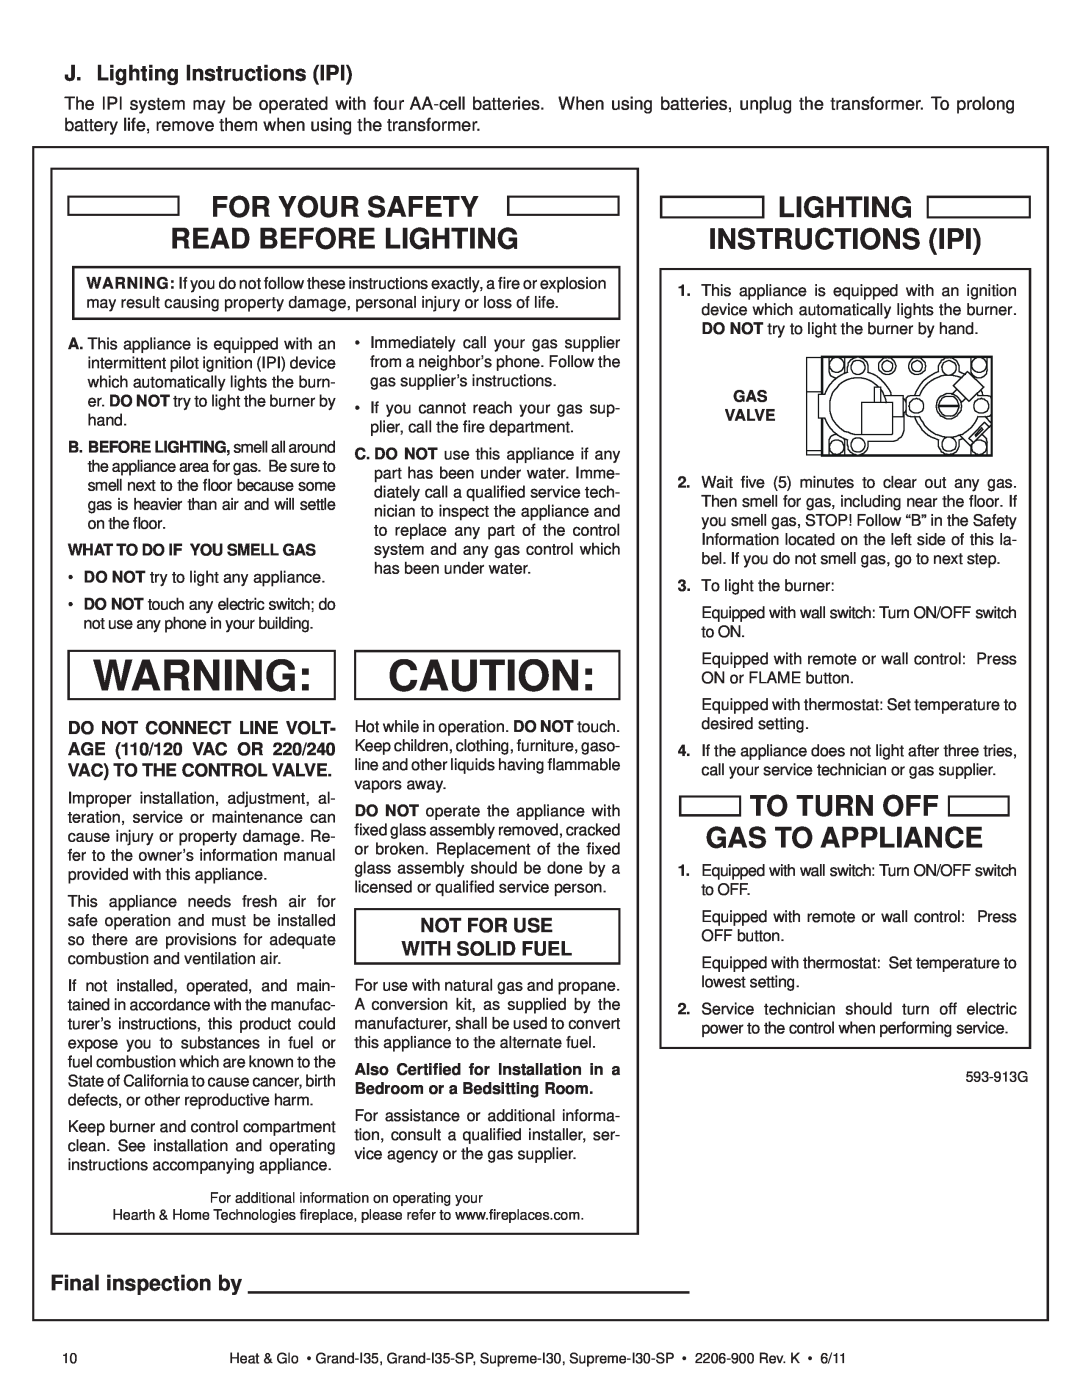 Heat & Glo LifeStyle GRAND-I35 For Your Safety Read Before Lighting, Lighting Instructions Ipi, Final inspection by 